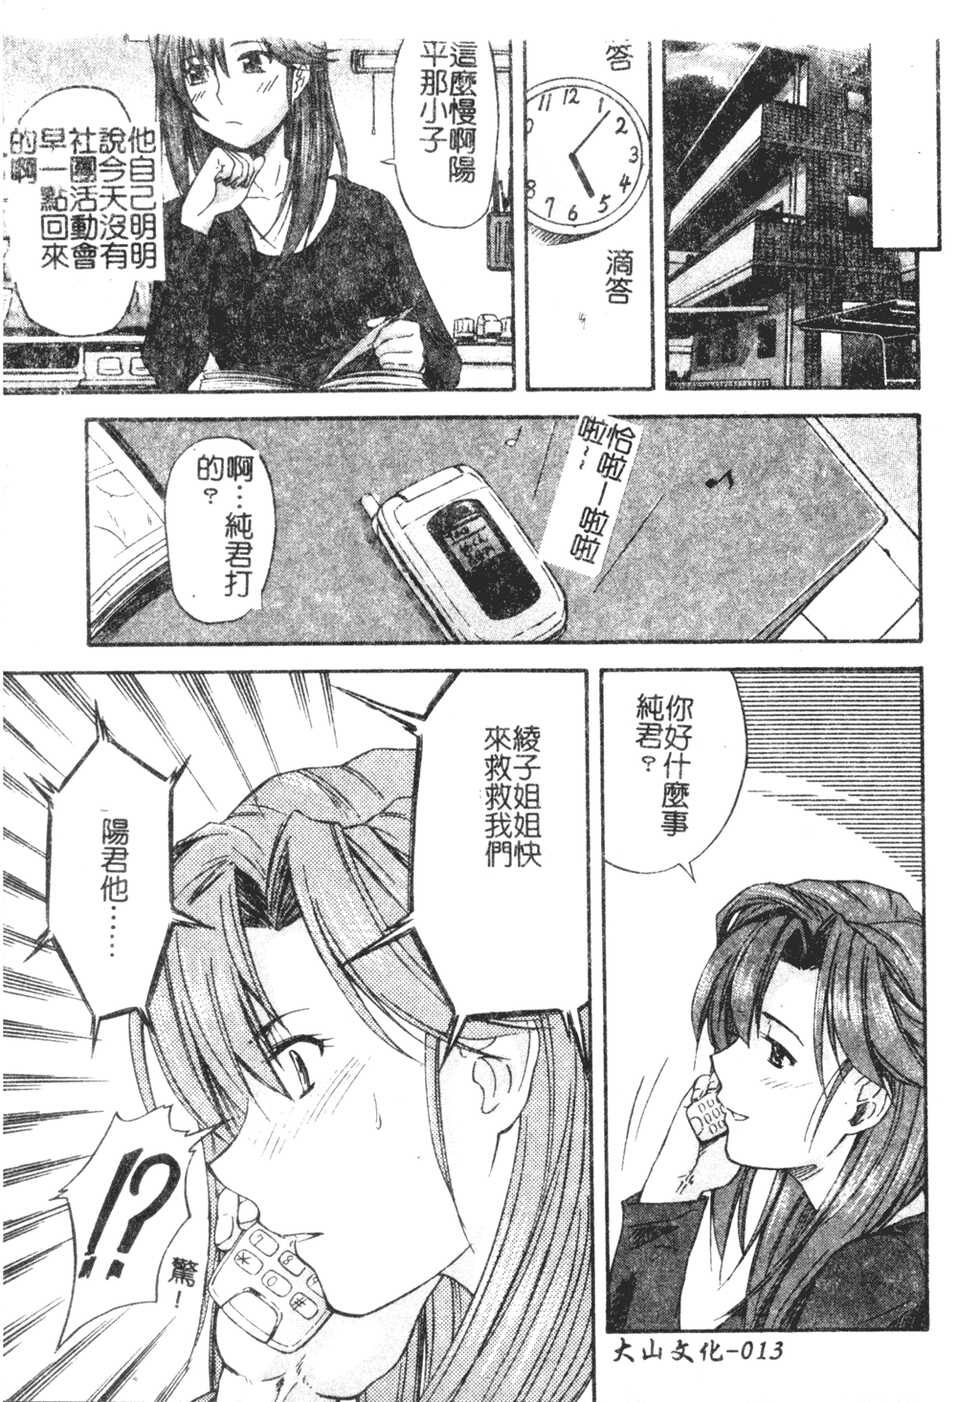 [Nagare Ippon] Turning Point Ch. 1-7 [Chinese] - Page 13